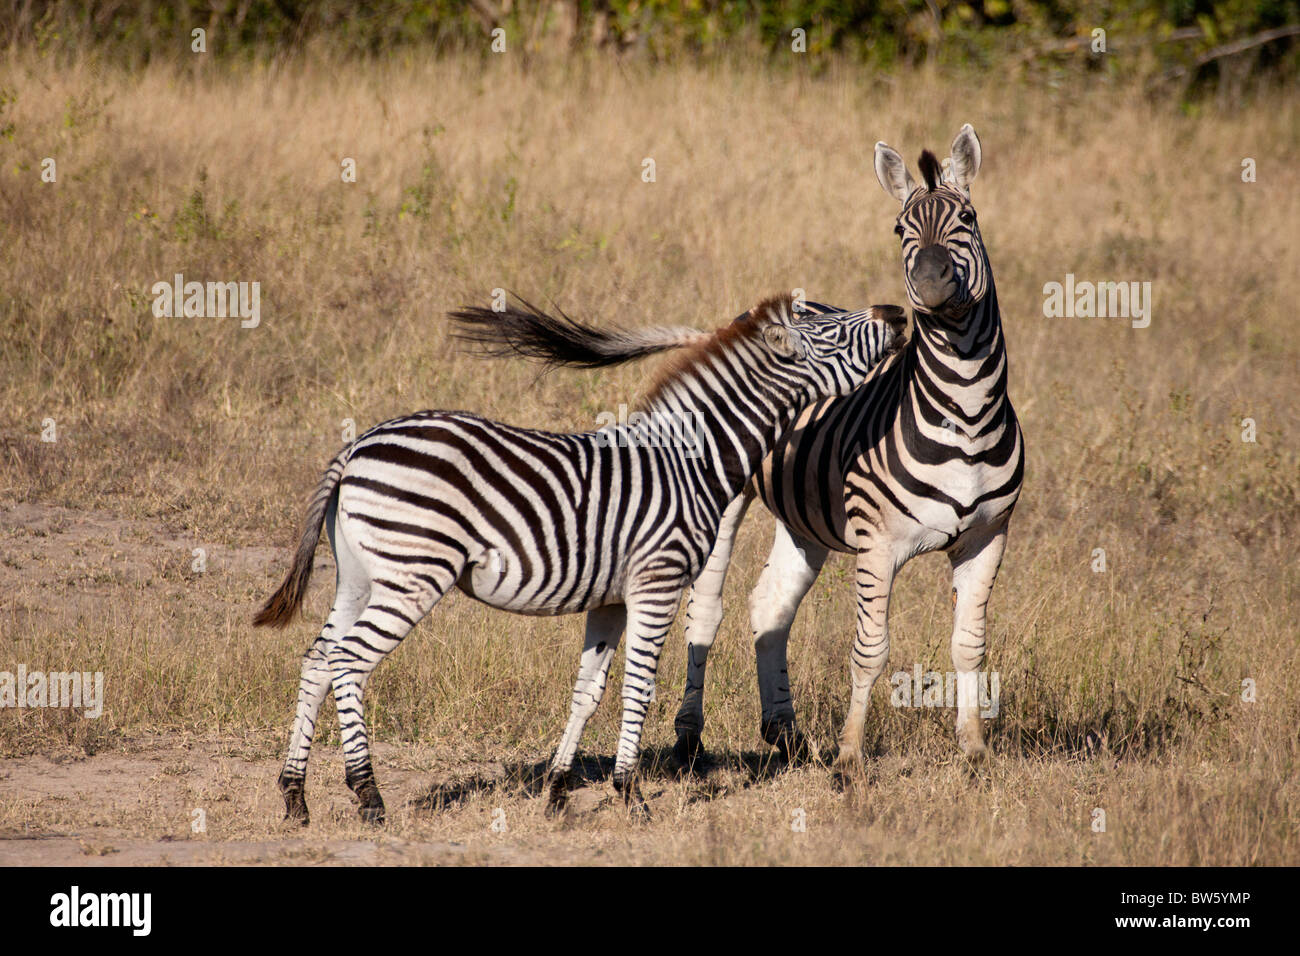 Young Burchell's Zebra Importunes its Mother Stock Photo